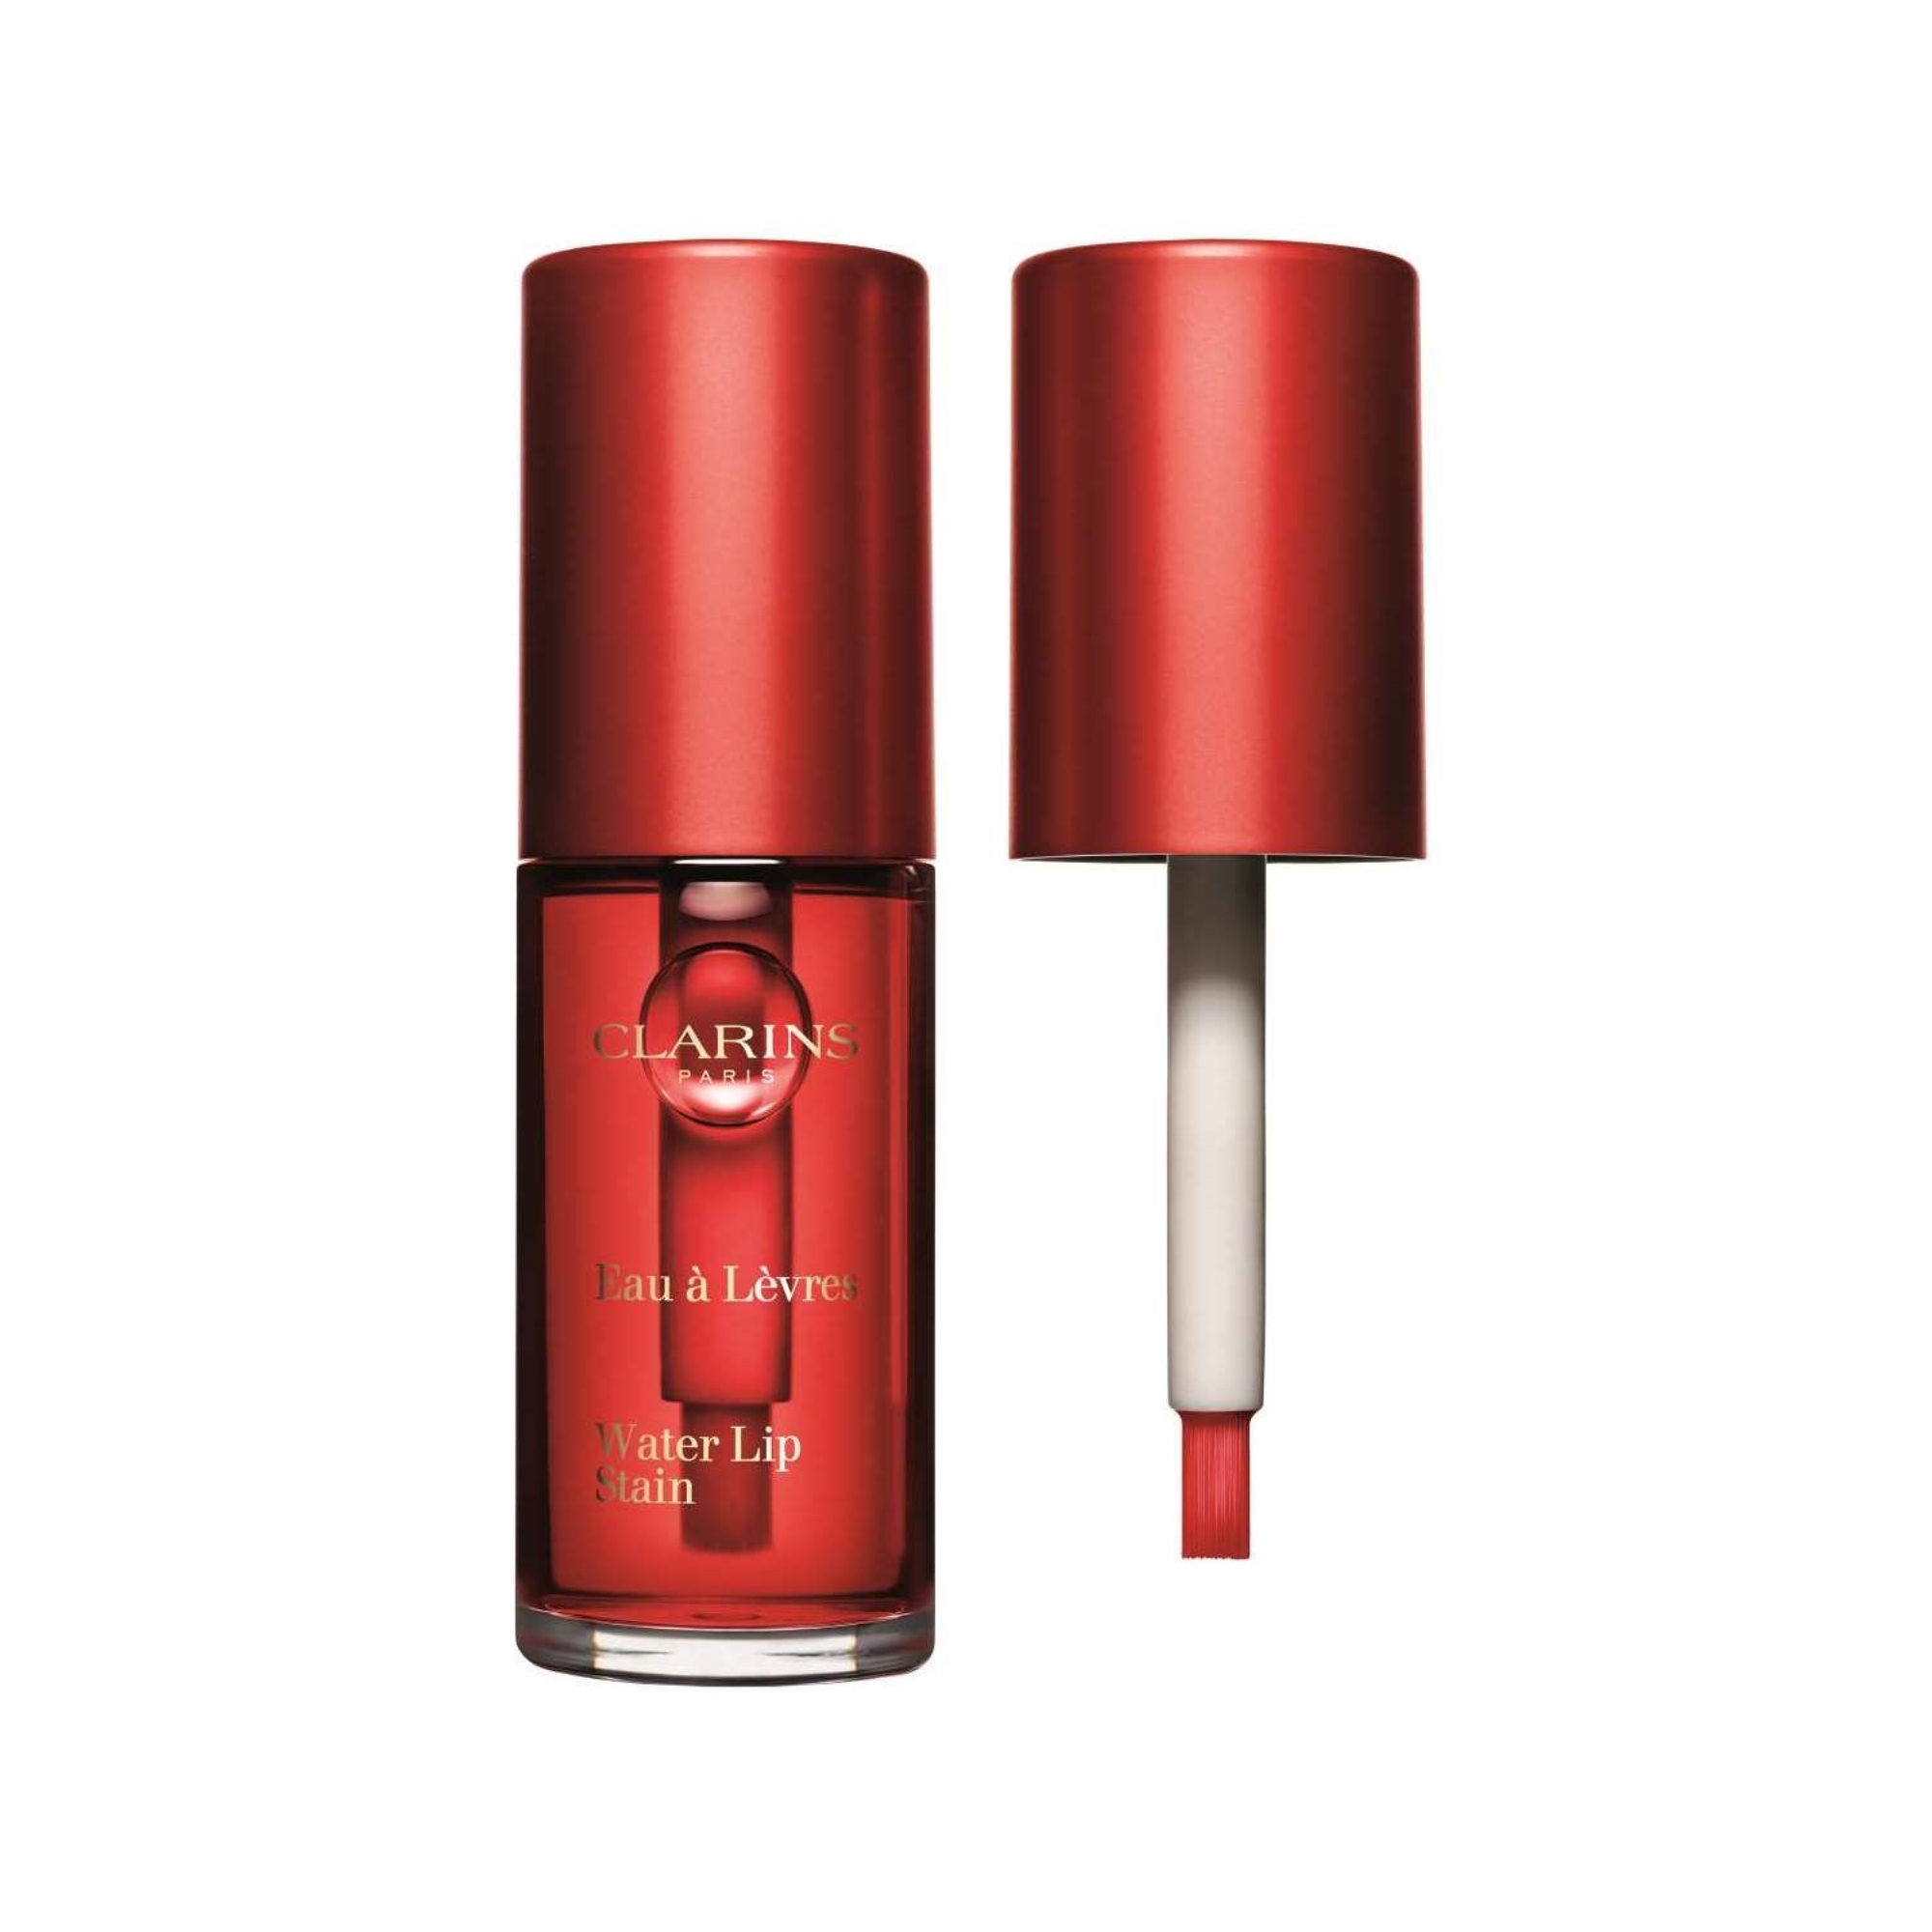 Image of Water Lip Stain 03 Clarins 7ml